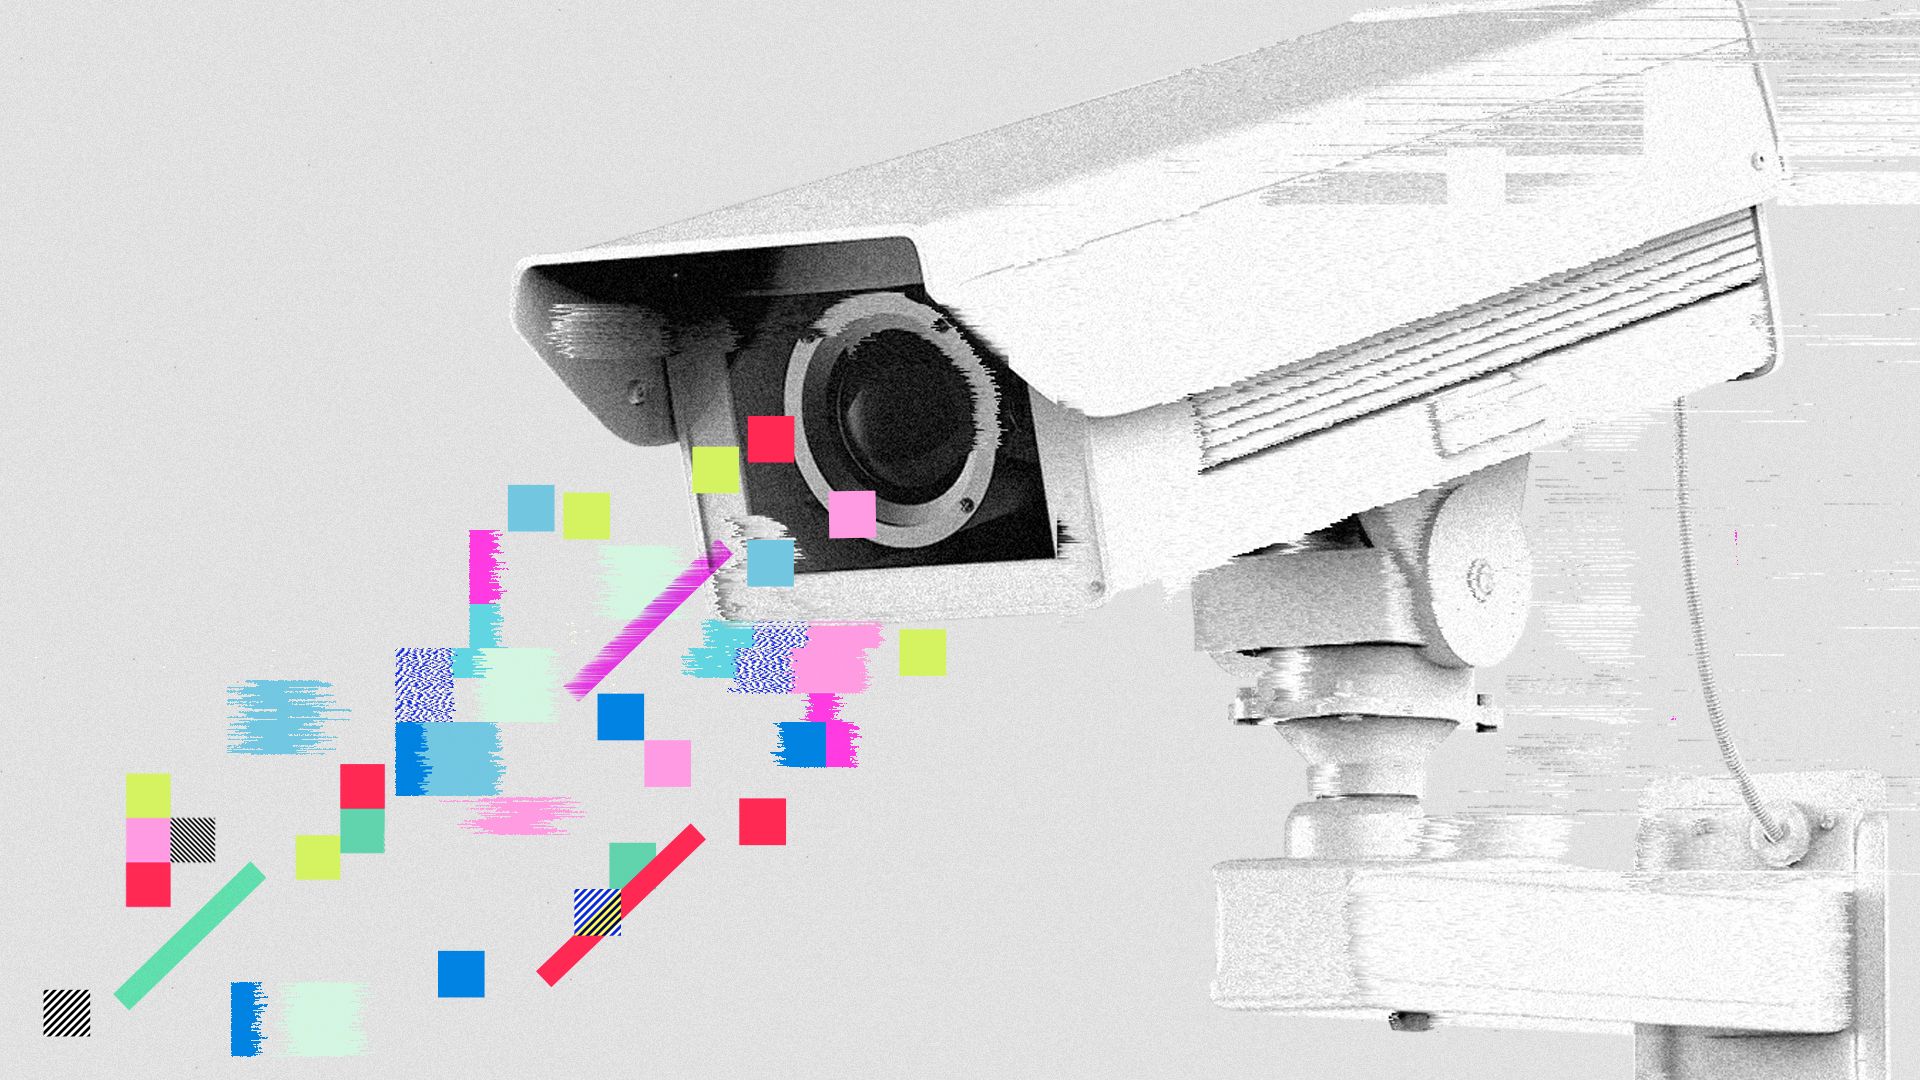 Illustration of a security camera interrupted by cubes and glitches